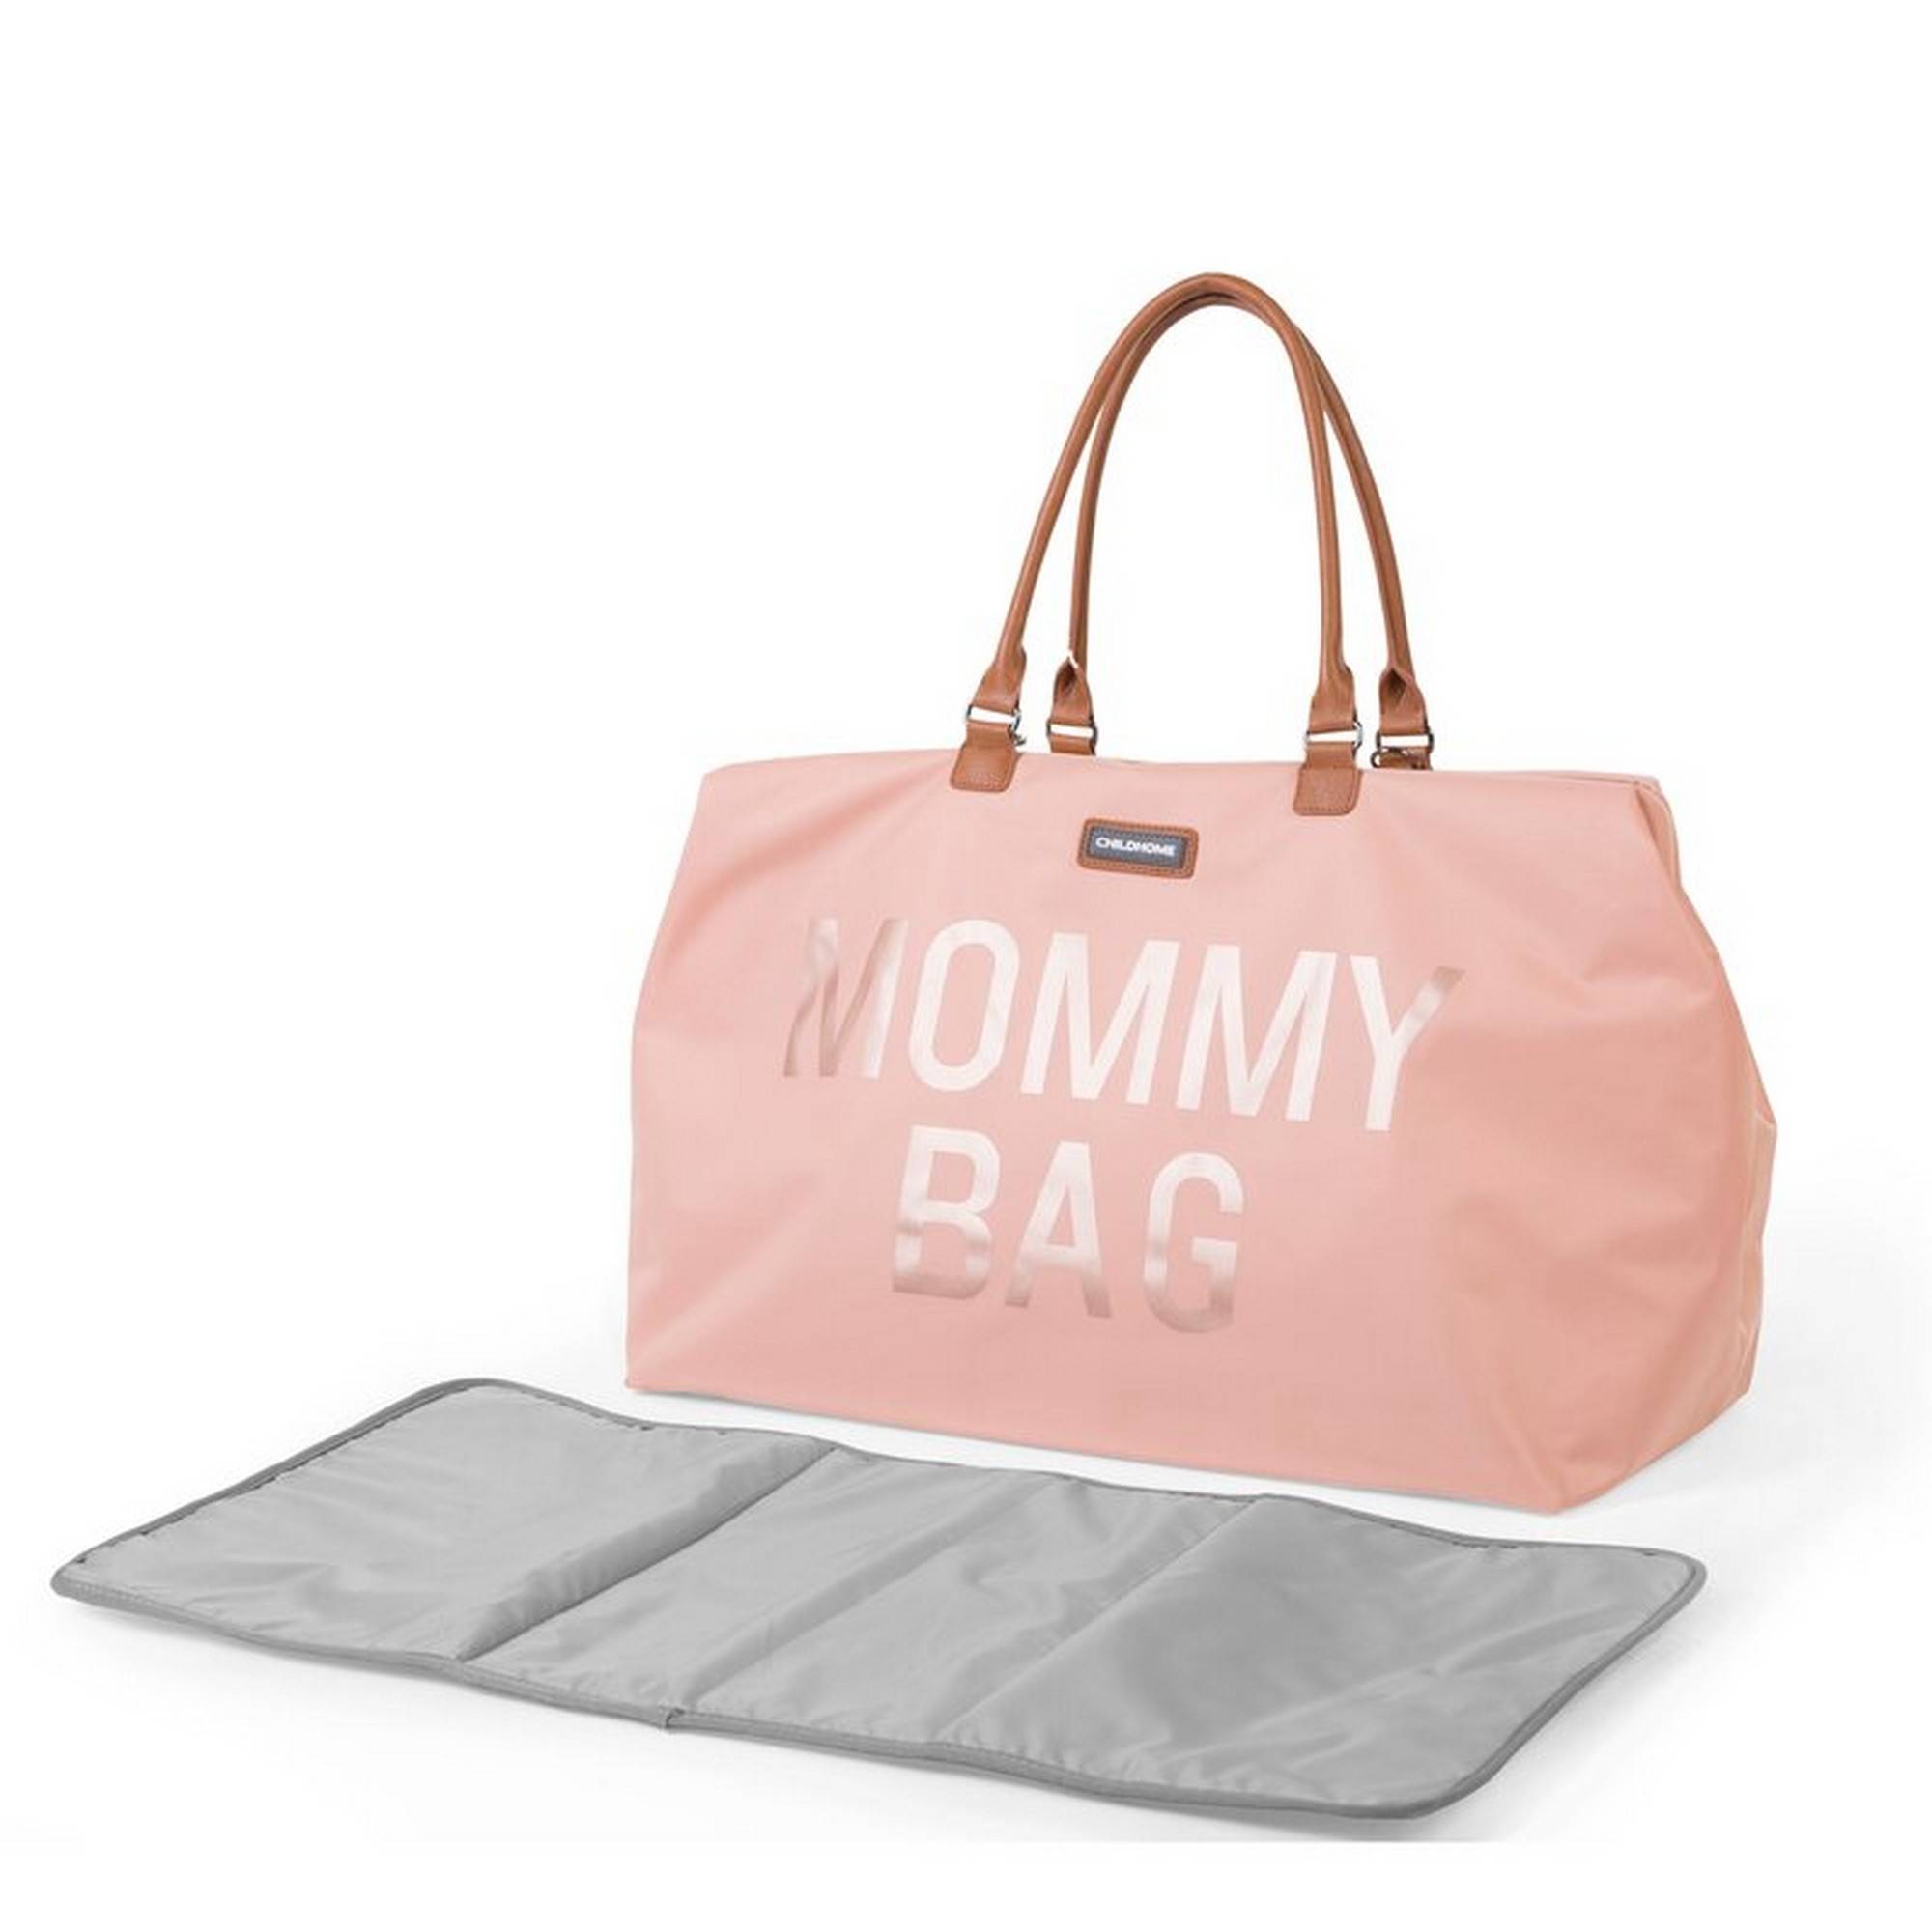 CHILDHOME Mommy Bag Big - Pink/Copper | Mamatoto - Mother & Child Lifestyle  Shop